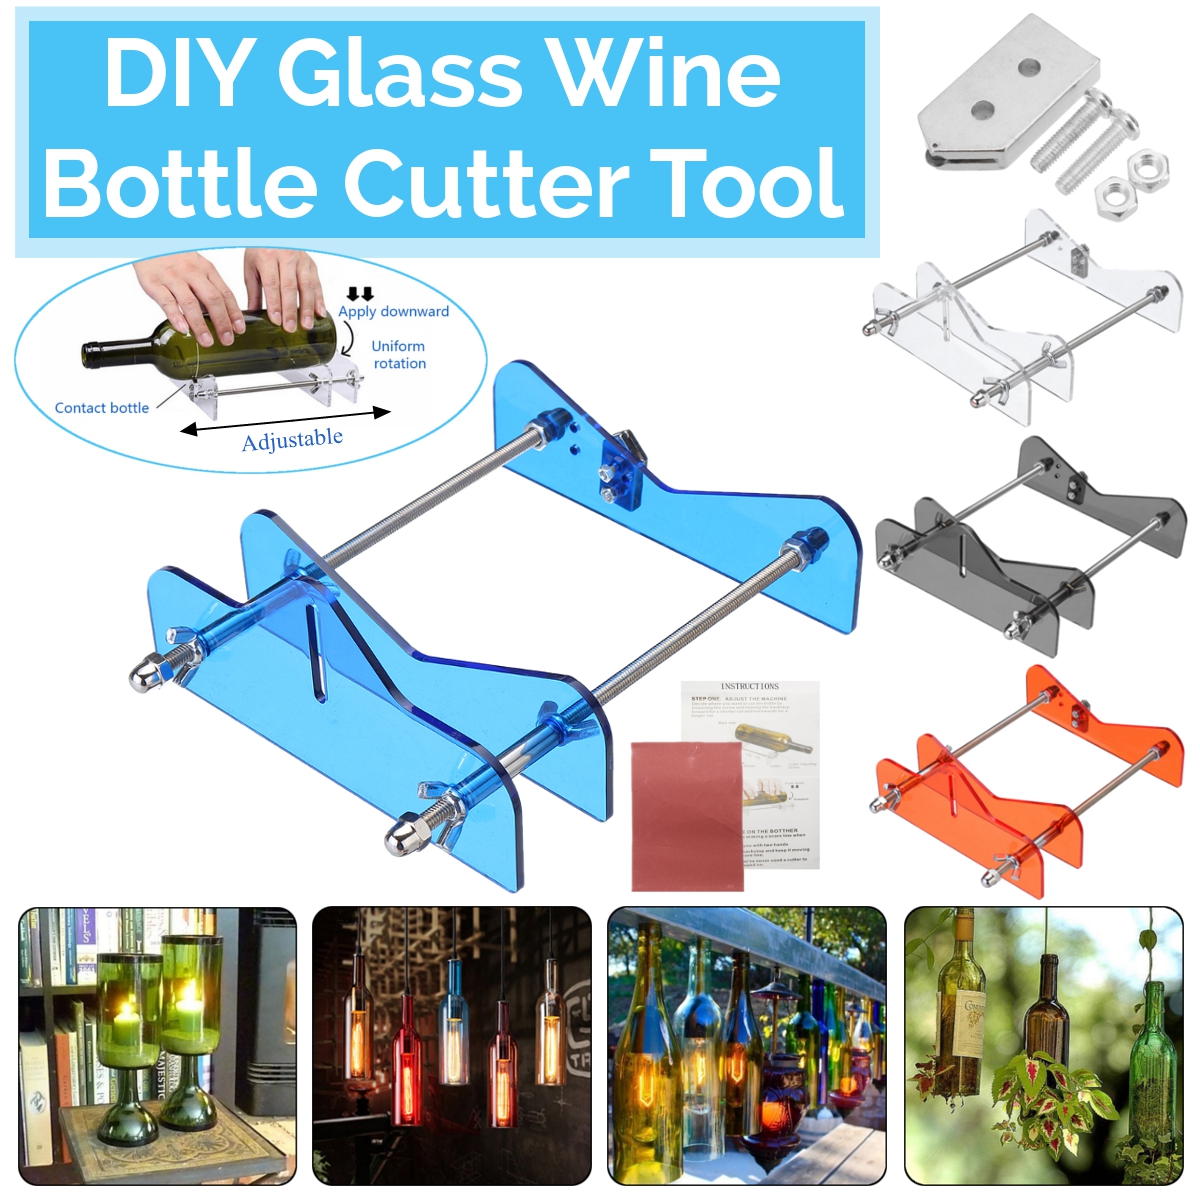 DIY-Glass-Bottle-Cutter-Cutting-Machine-Kit-Craft-Party-Recycle-Tool-1680785-5